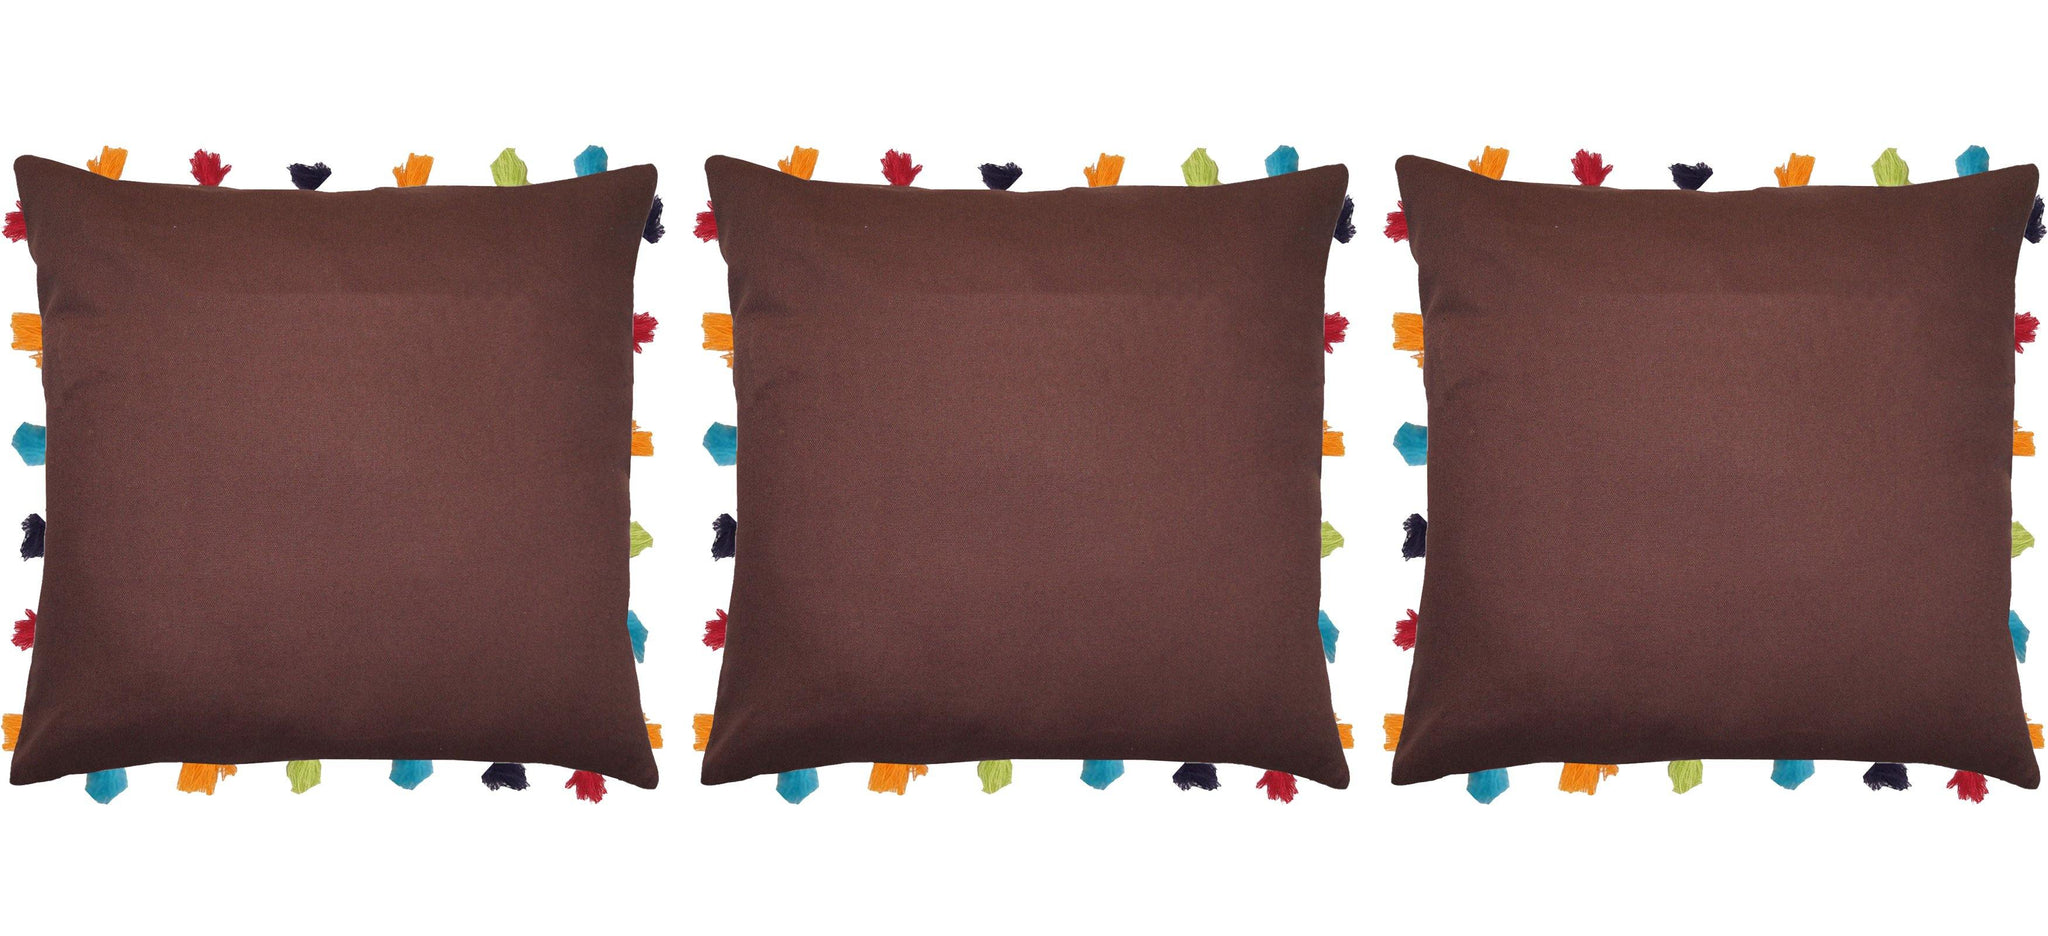 Lushomes French Roast Cushion Cover with Colorful tassels (3 pcs, 18 x 18”) - Lushomes